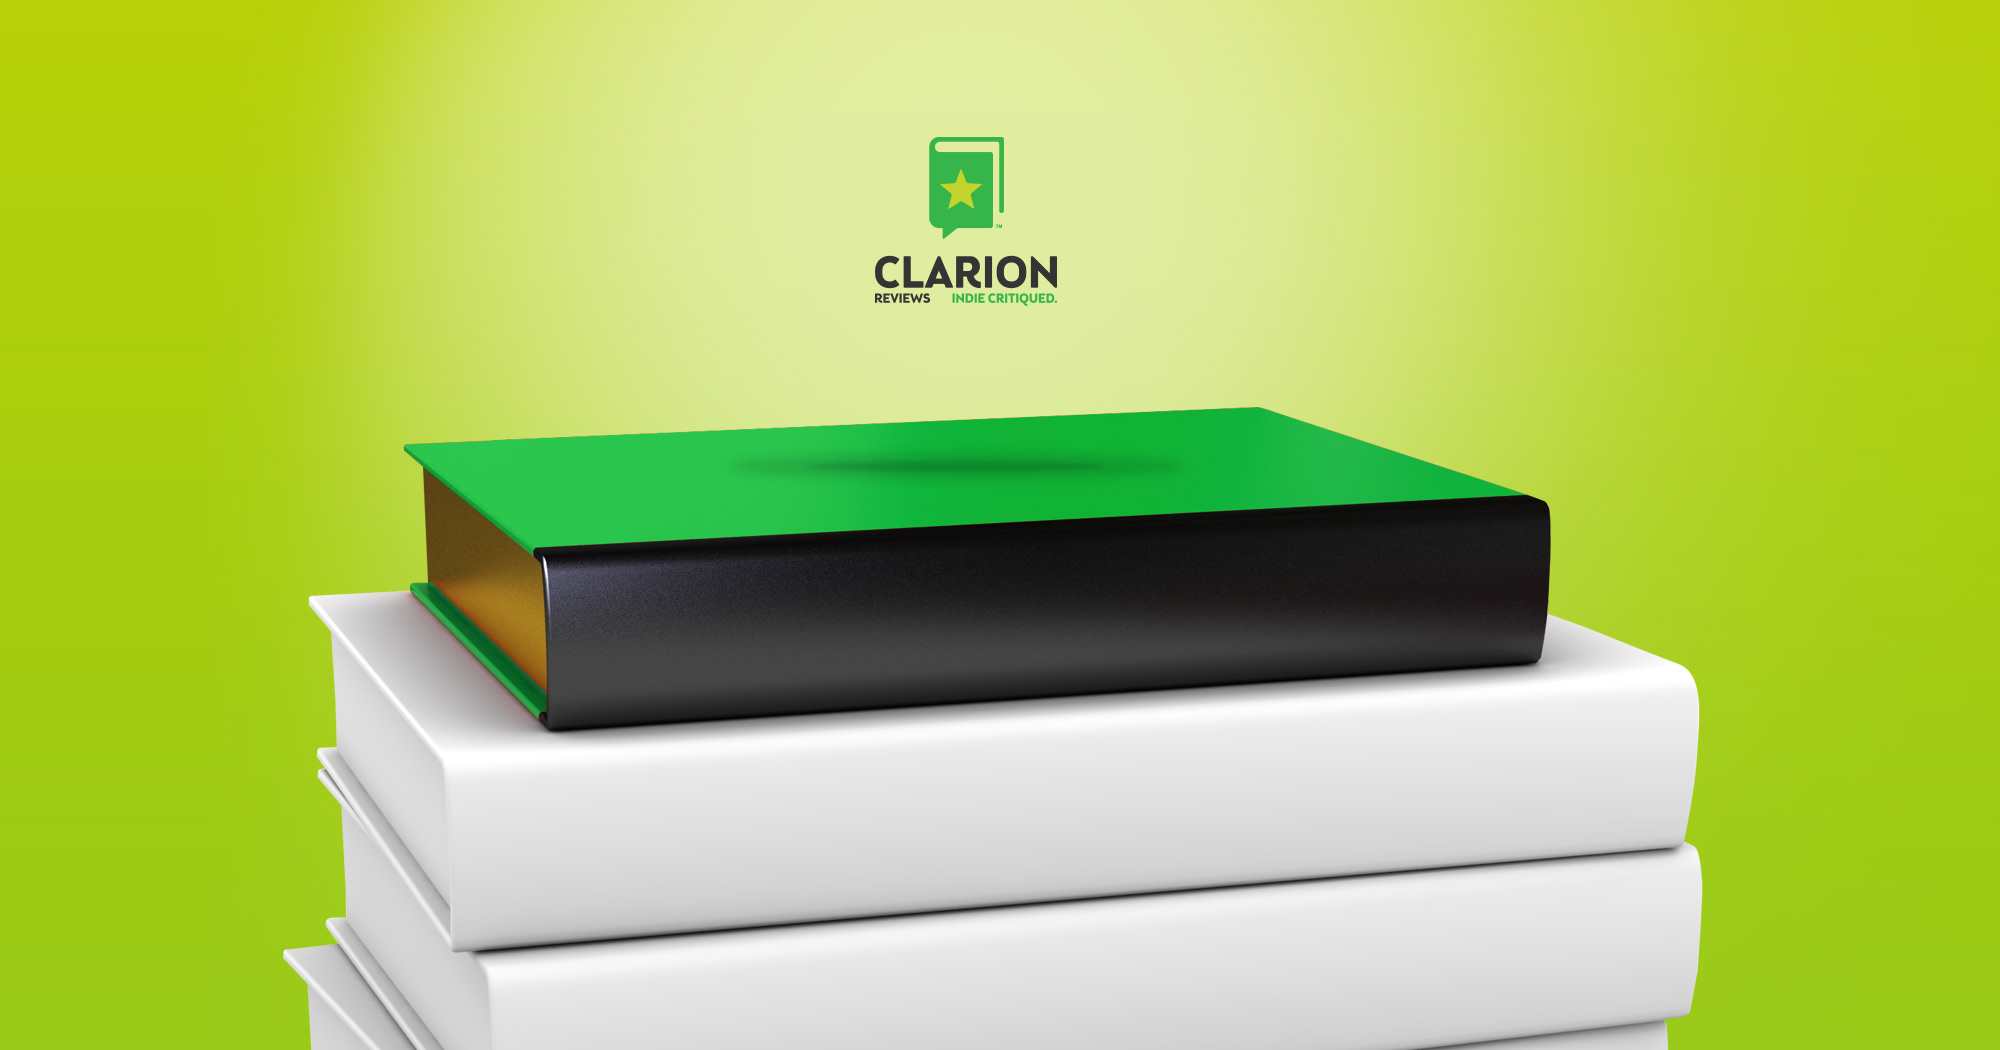 Clarion Reviews